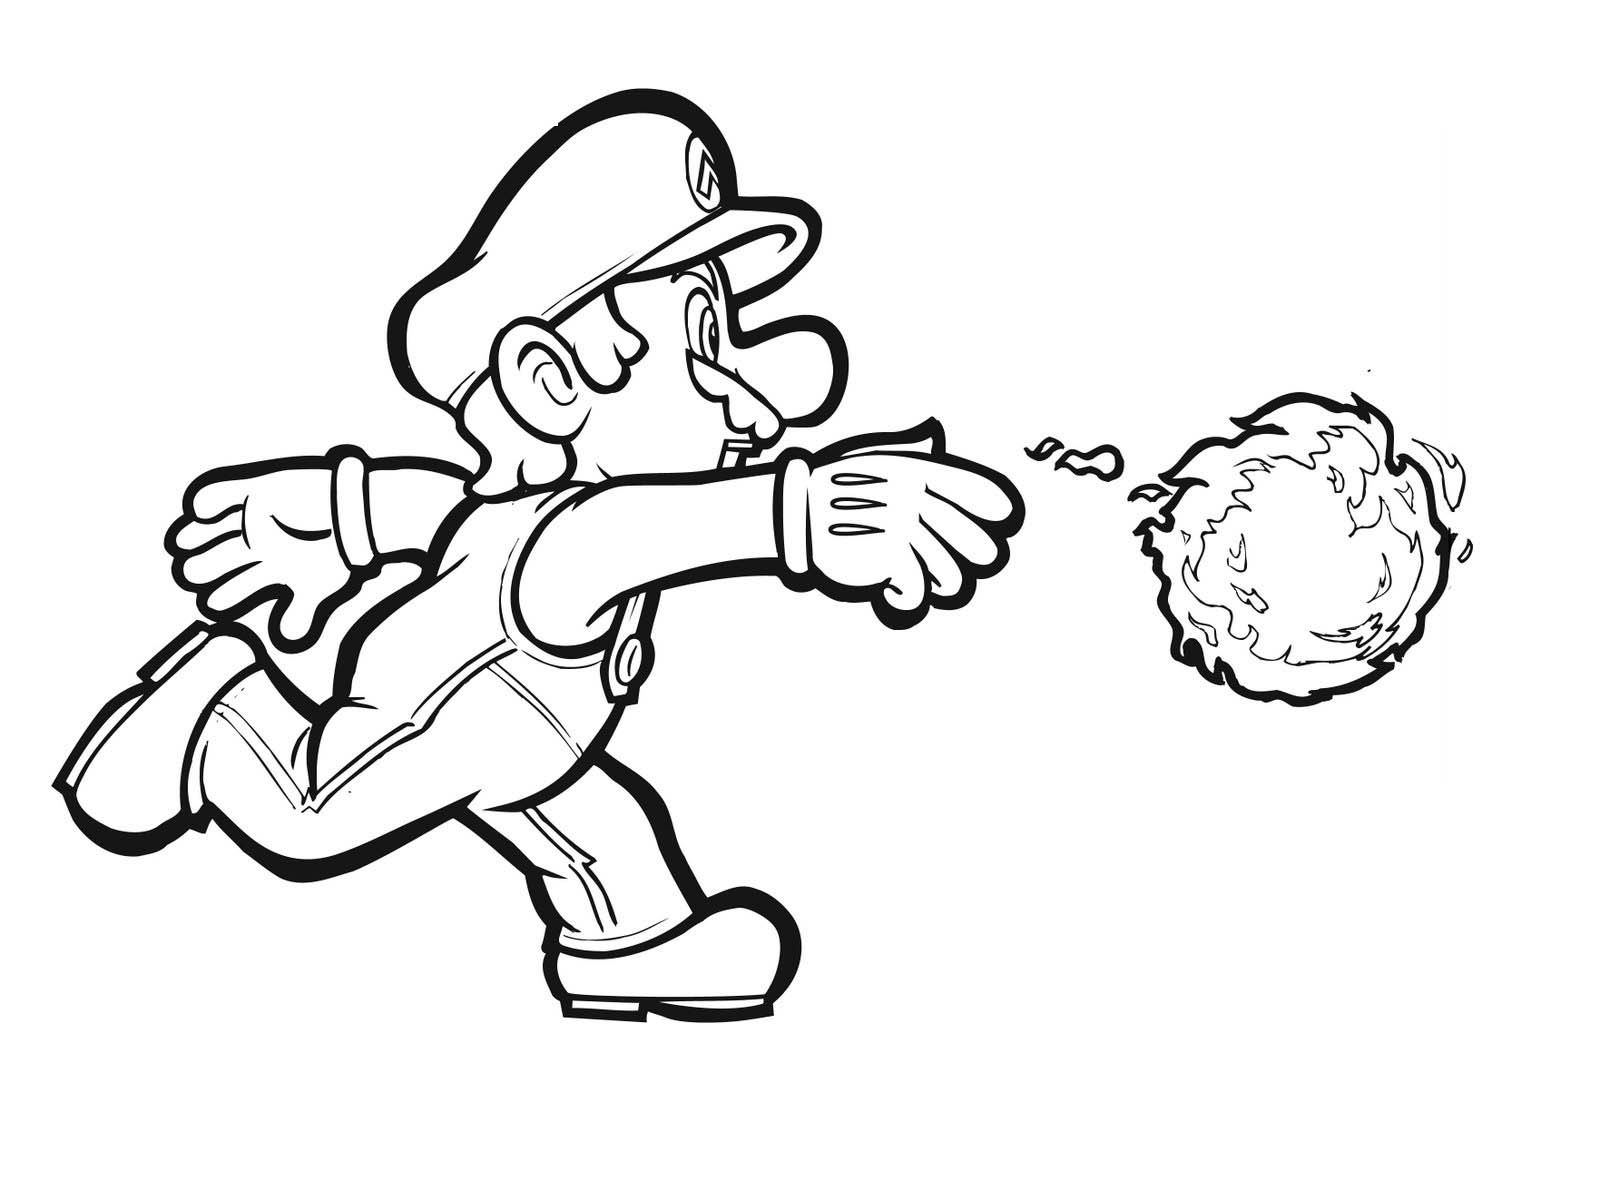 Super Mario Characters Coloring Pages - VoteForVerde.com